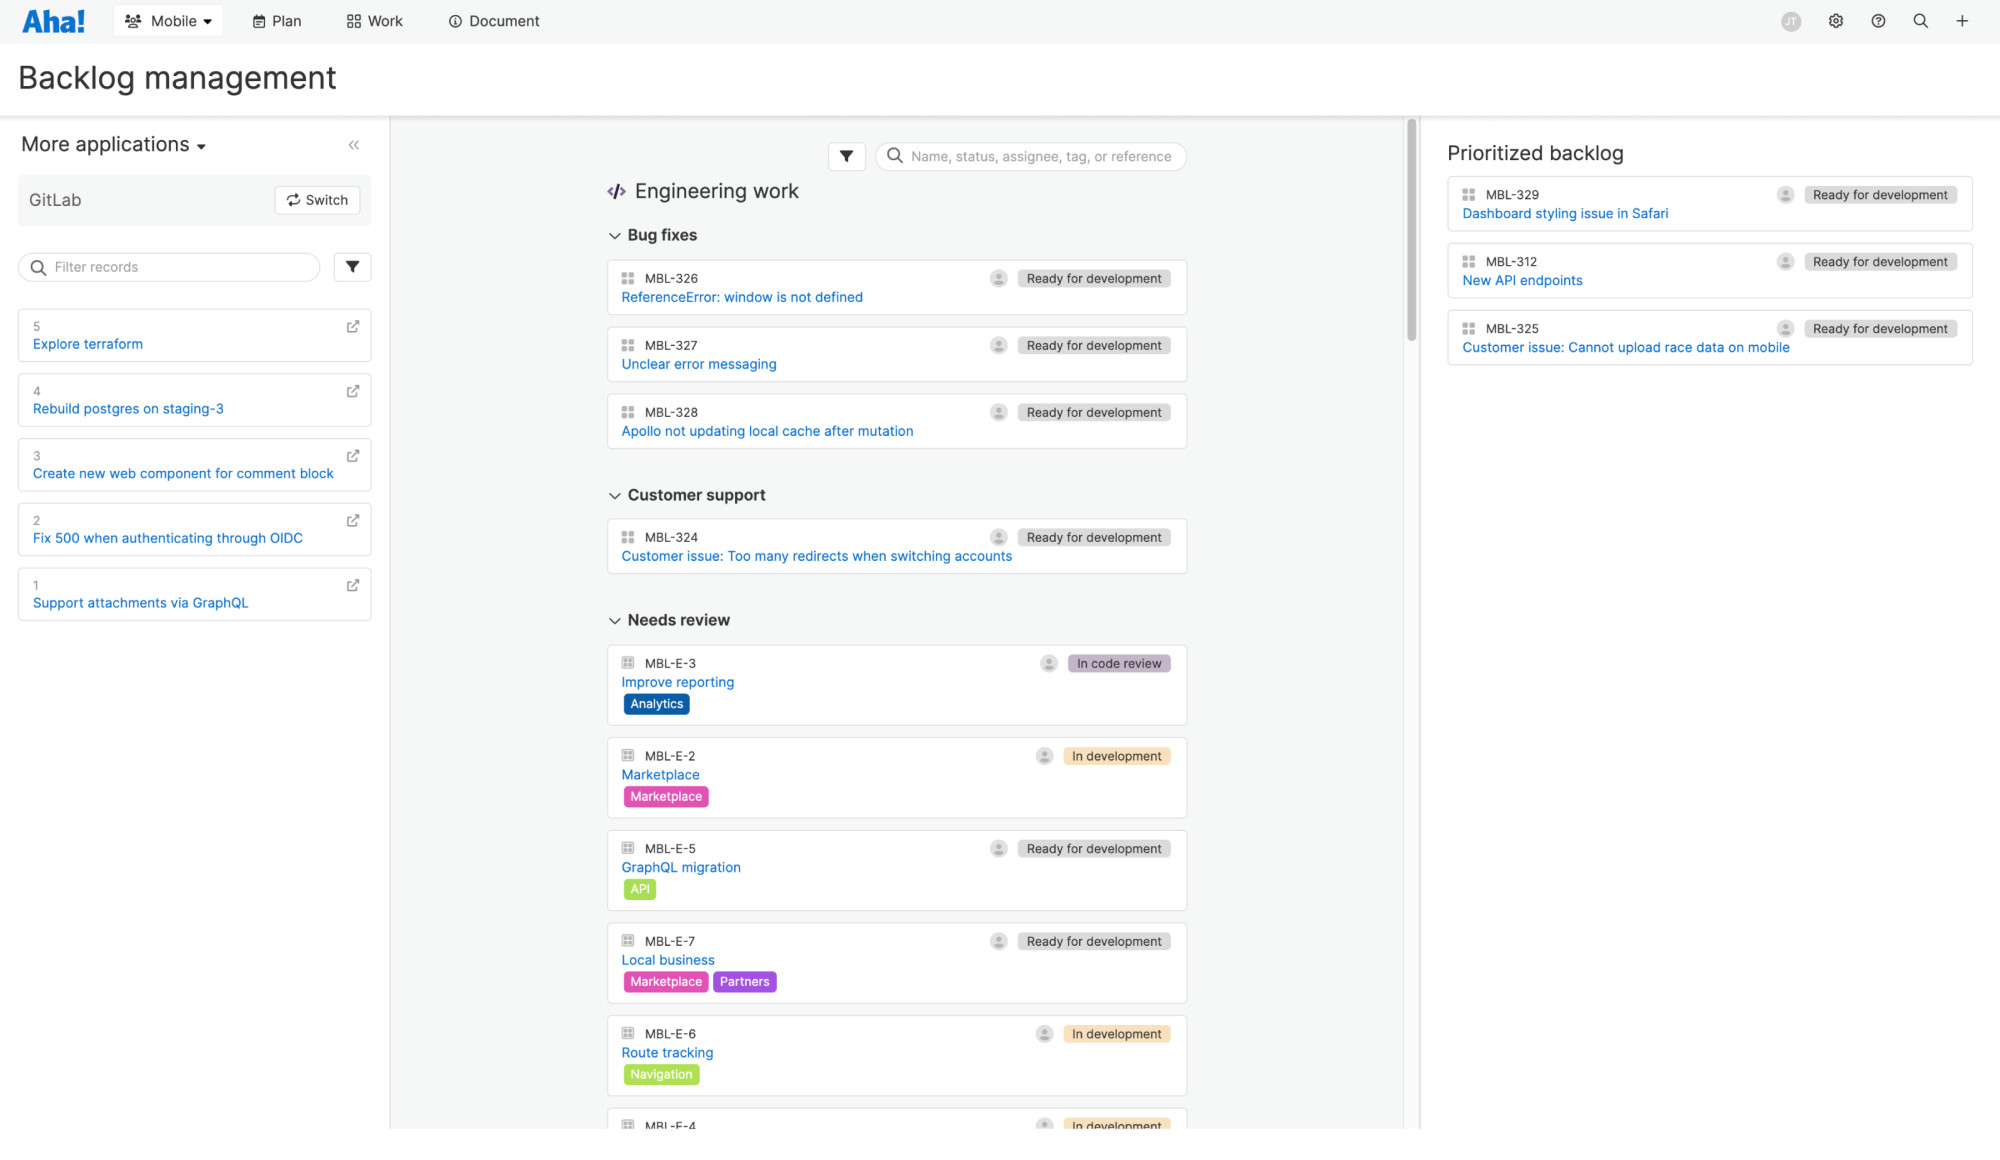 Changes made to the user story in Aha! Develop will not sync back to the issue in GitLab.